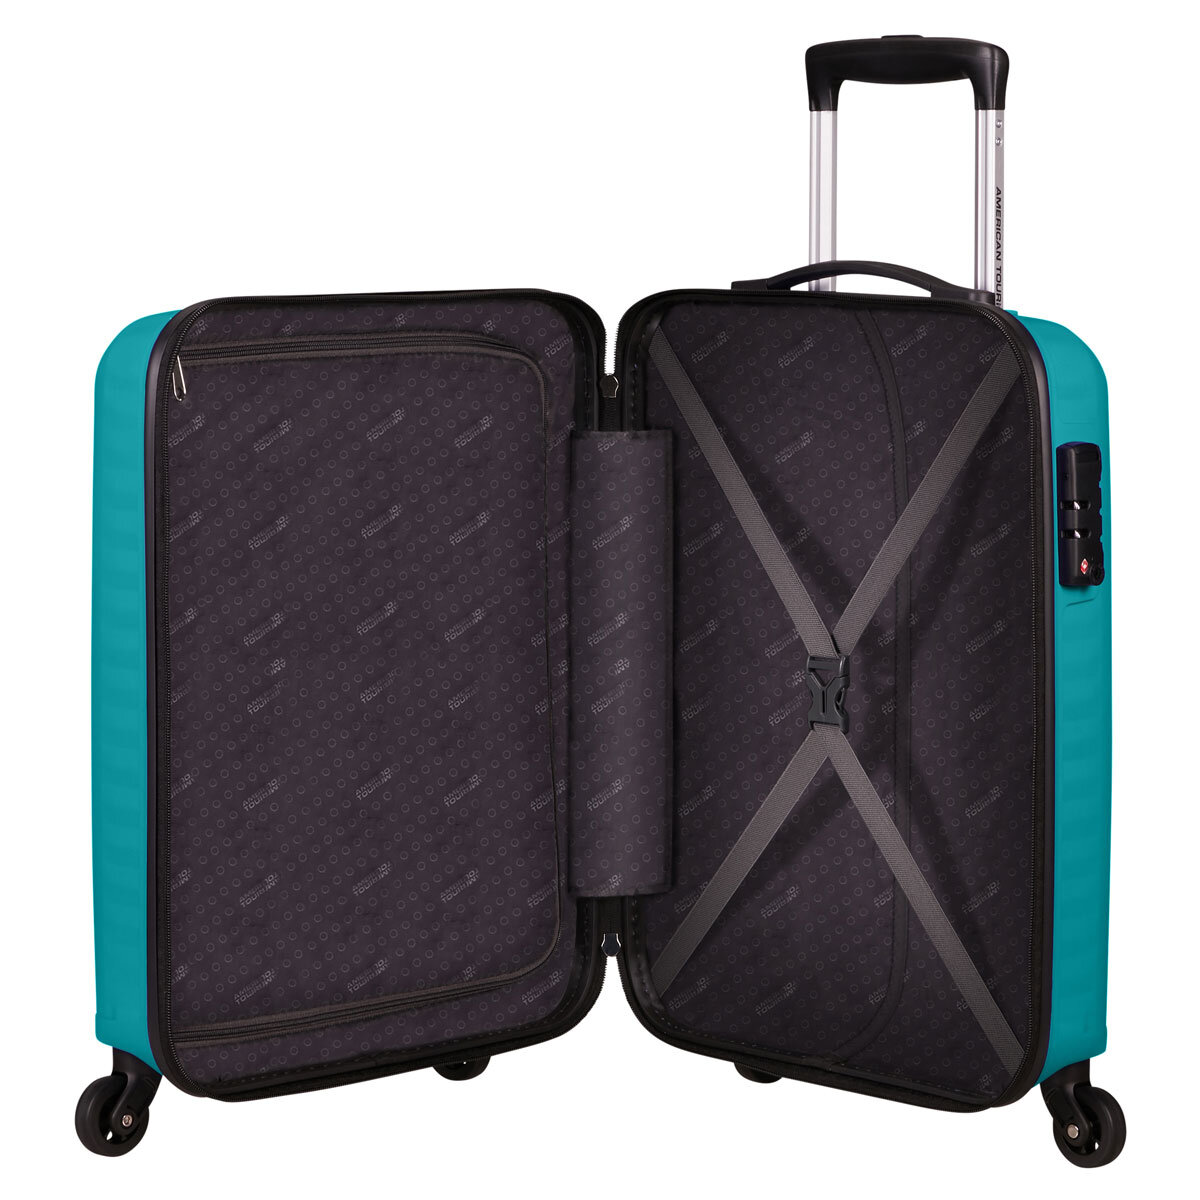 American Tourister Jet Driver 55cm Carry On Hardside Spinner Case in Turquoise